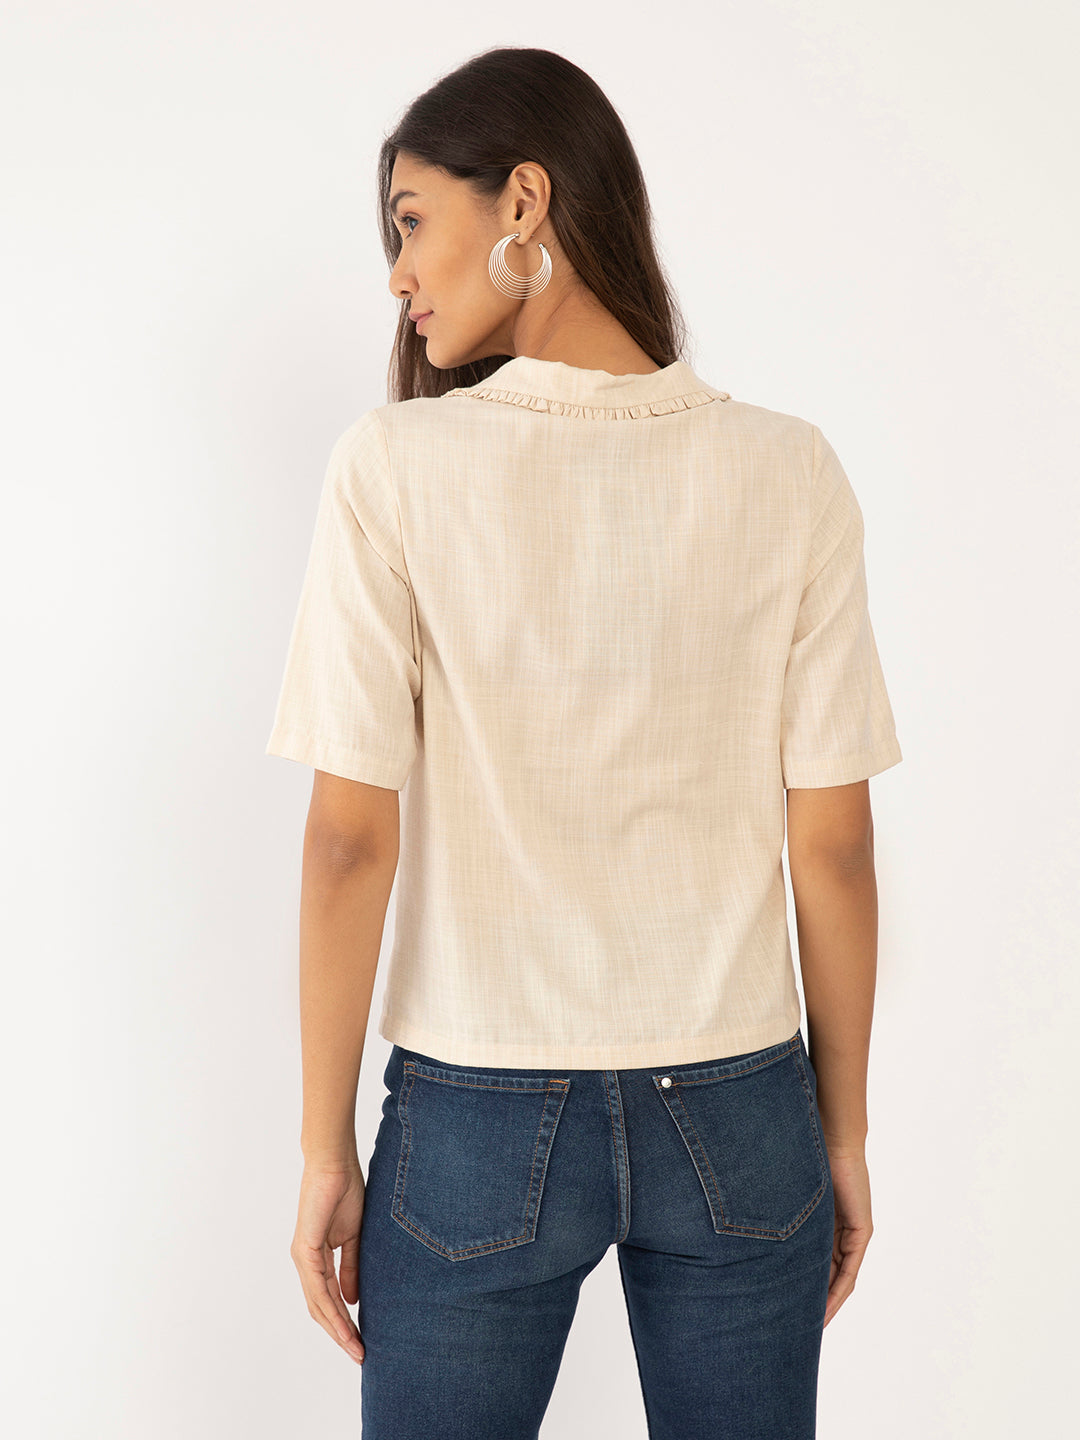 Cream Embroidered Top For Women